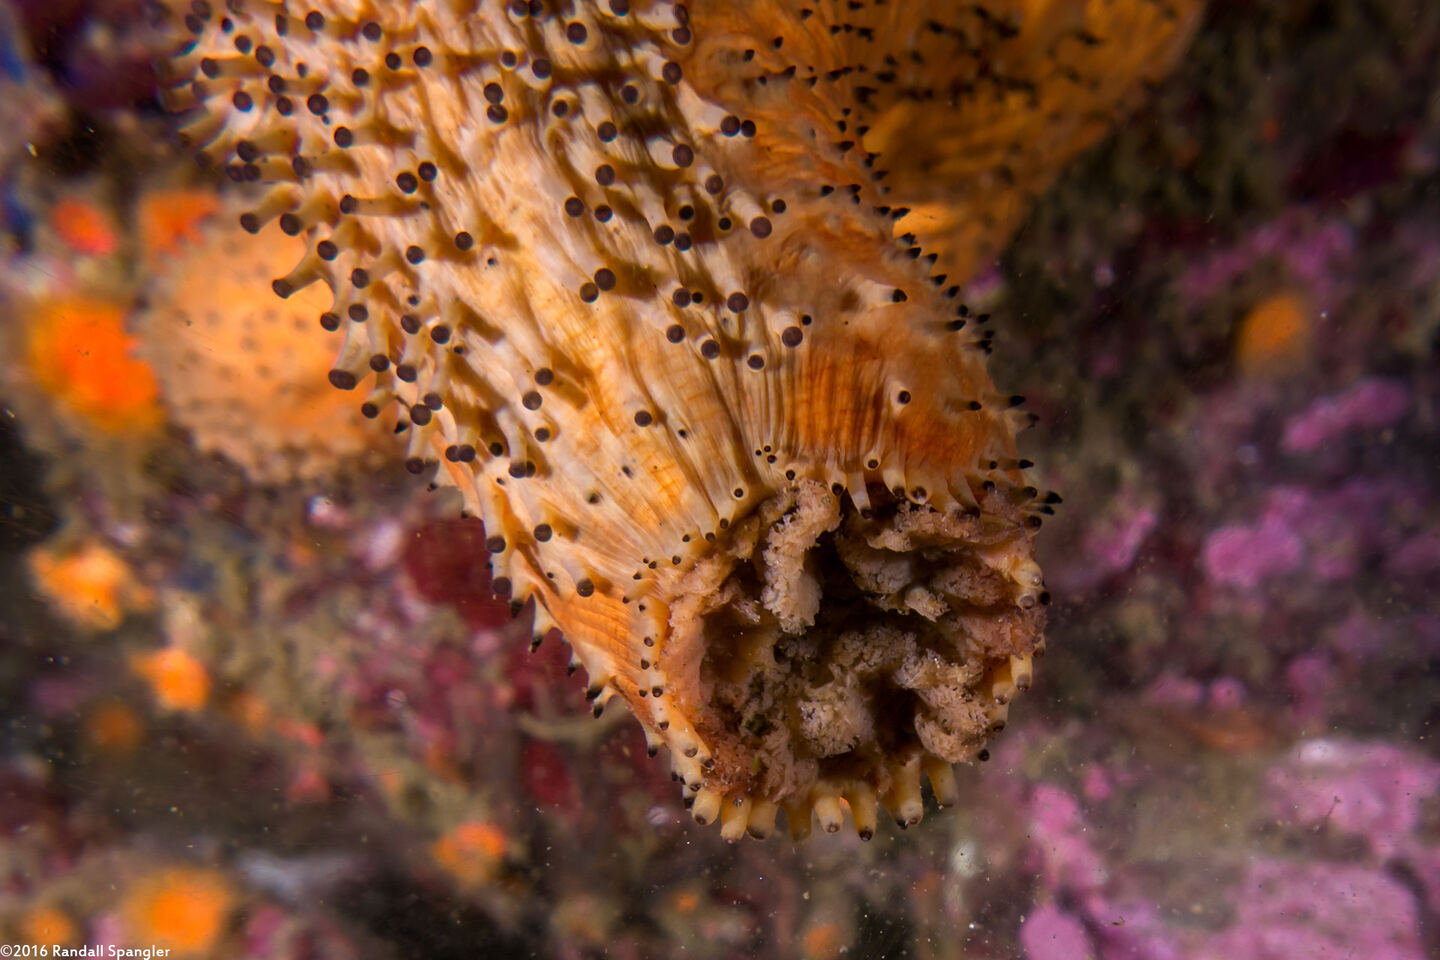 Apostichopus parvimensis (Warty Sea Cucumber); Close-up of mouth